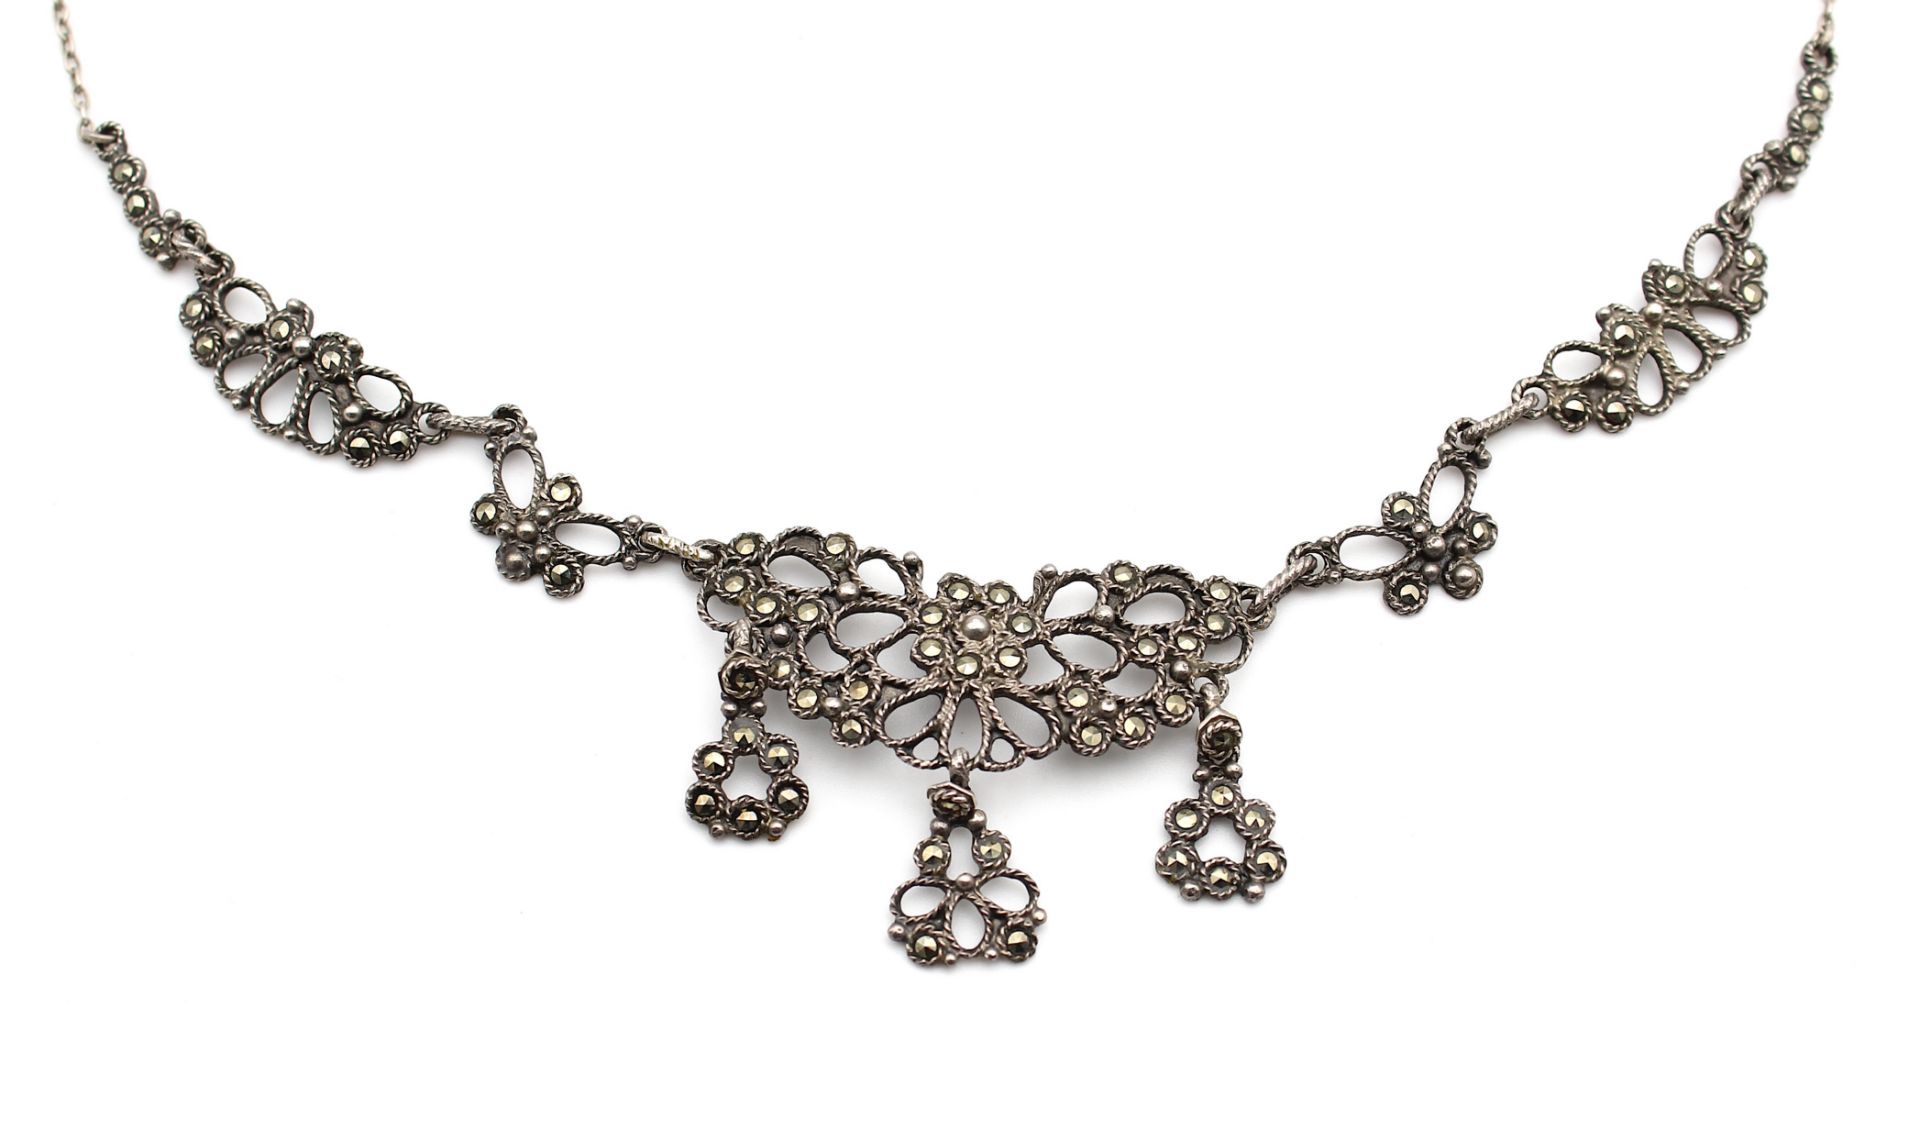 Bracelet and necklace in silver with marcasites - Image 4 of 4